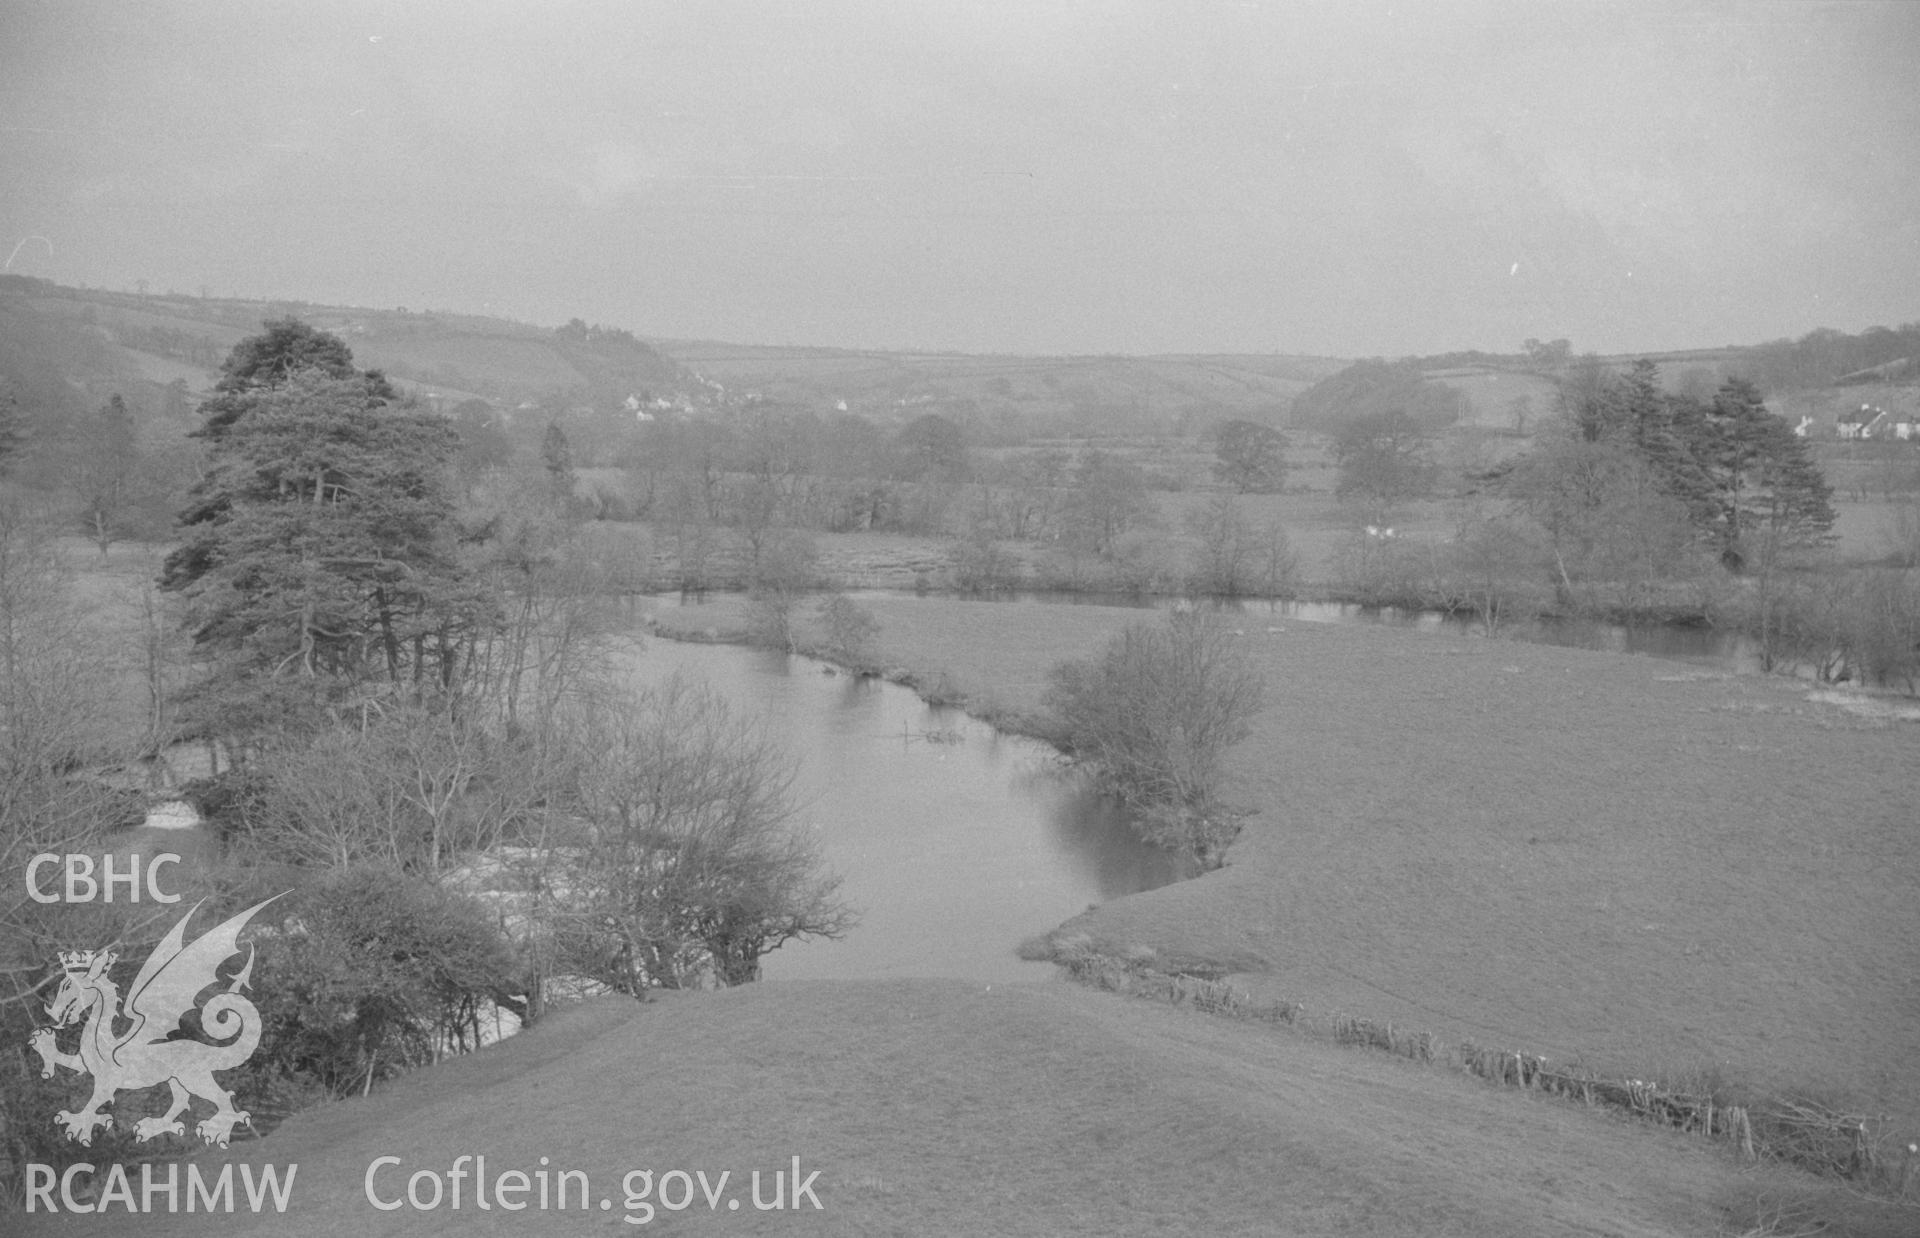 Digital copy of black & white negative showing view from the eastern end of the castle earthworks across the Teifi and up the valley with Llandyfriog in the distance. Photograph by Arthur O. Chater, April 1966, looking east north east from SN 312 407.